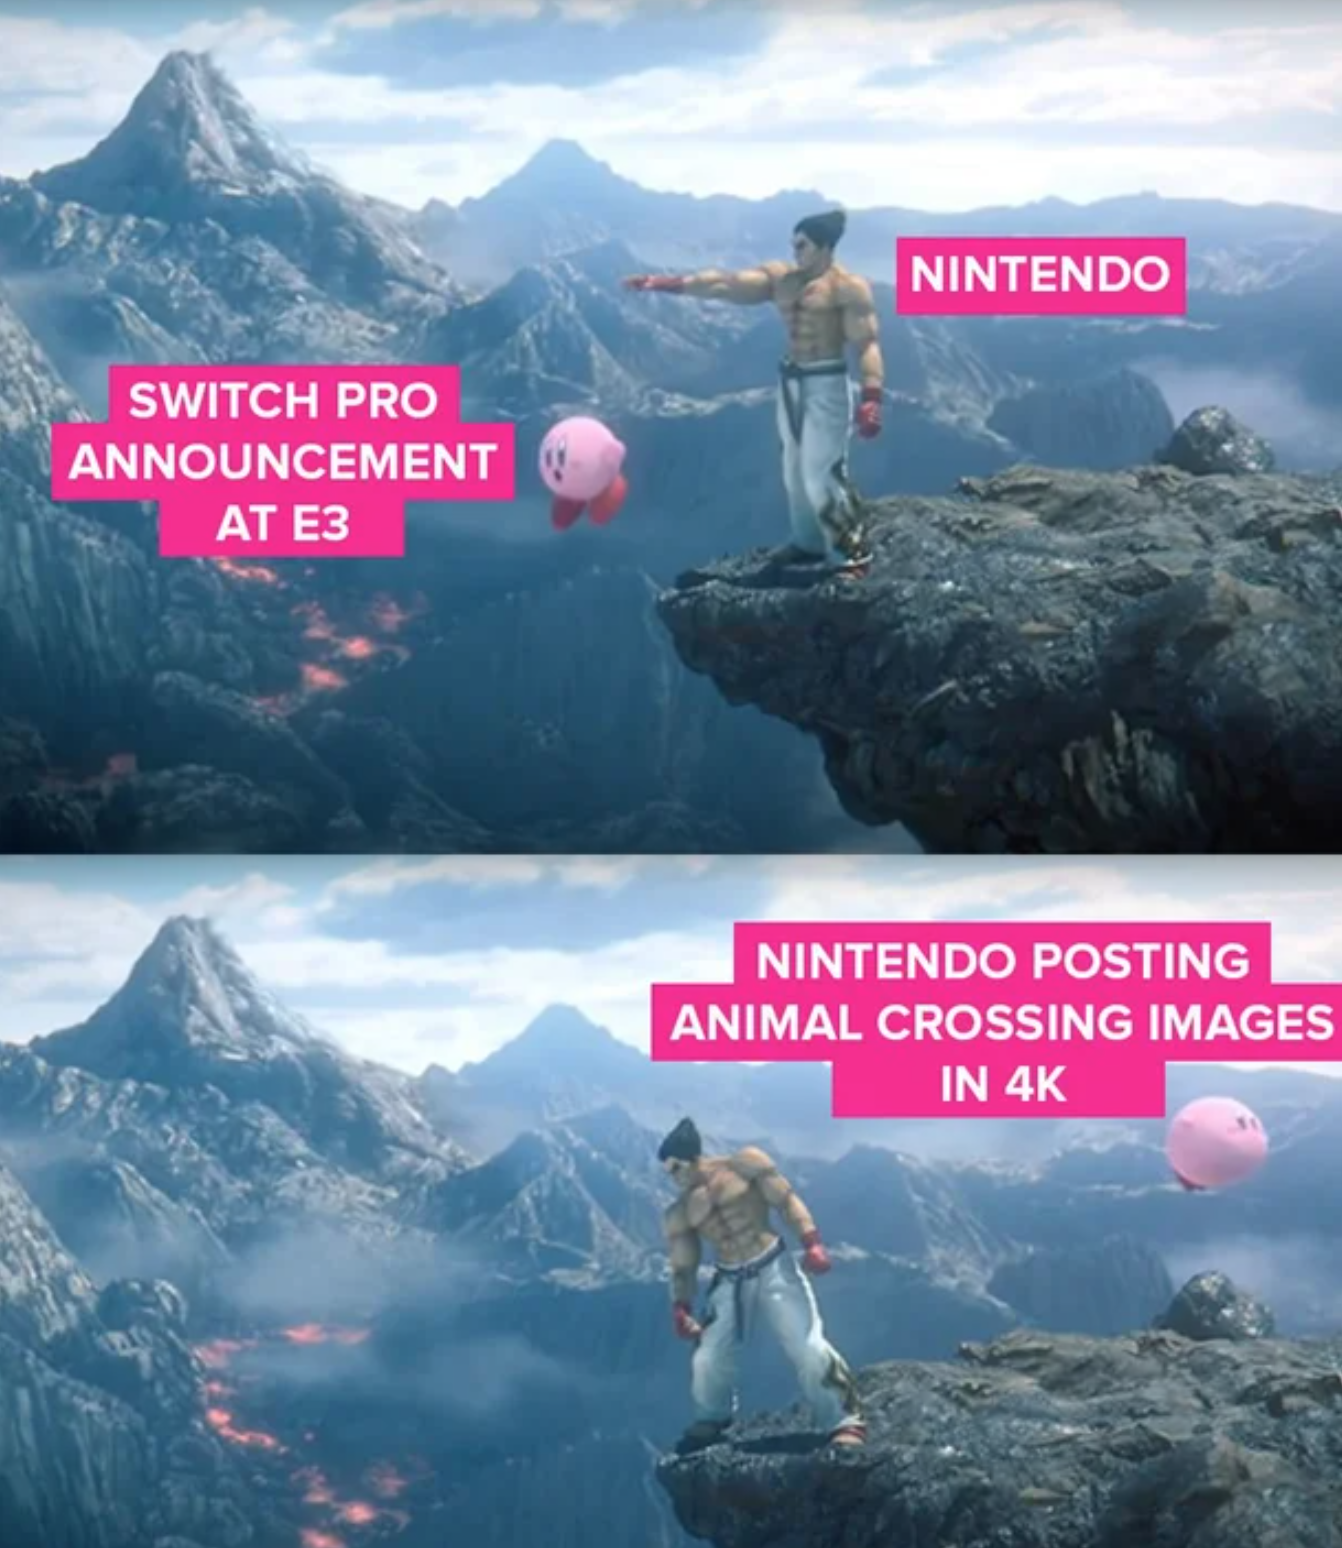 funny gaming memes - nature - Nintendo Switch Pro Announcement At E3 Nintendo Posting Animal Crossing Images In 4K